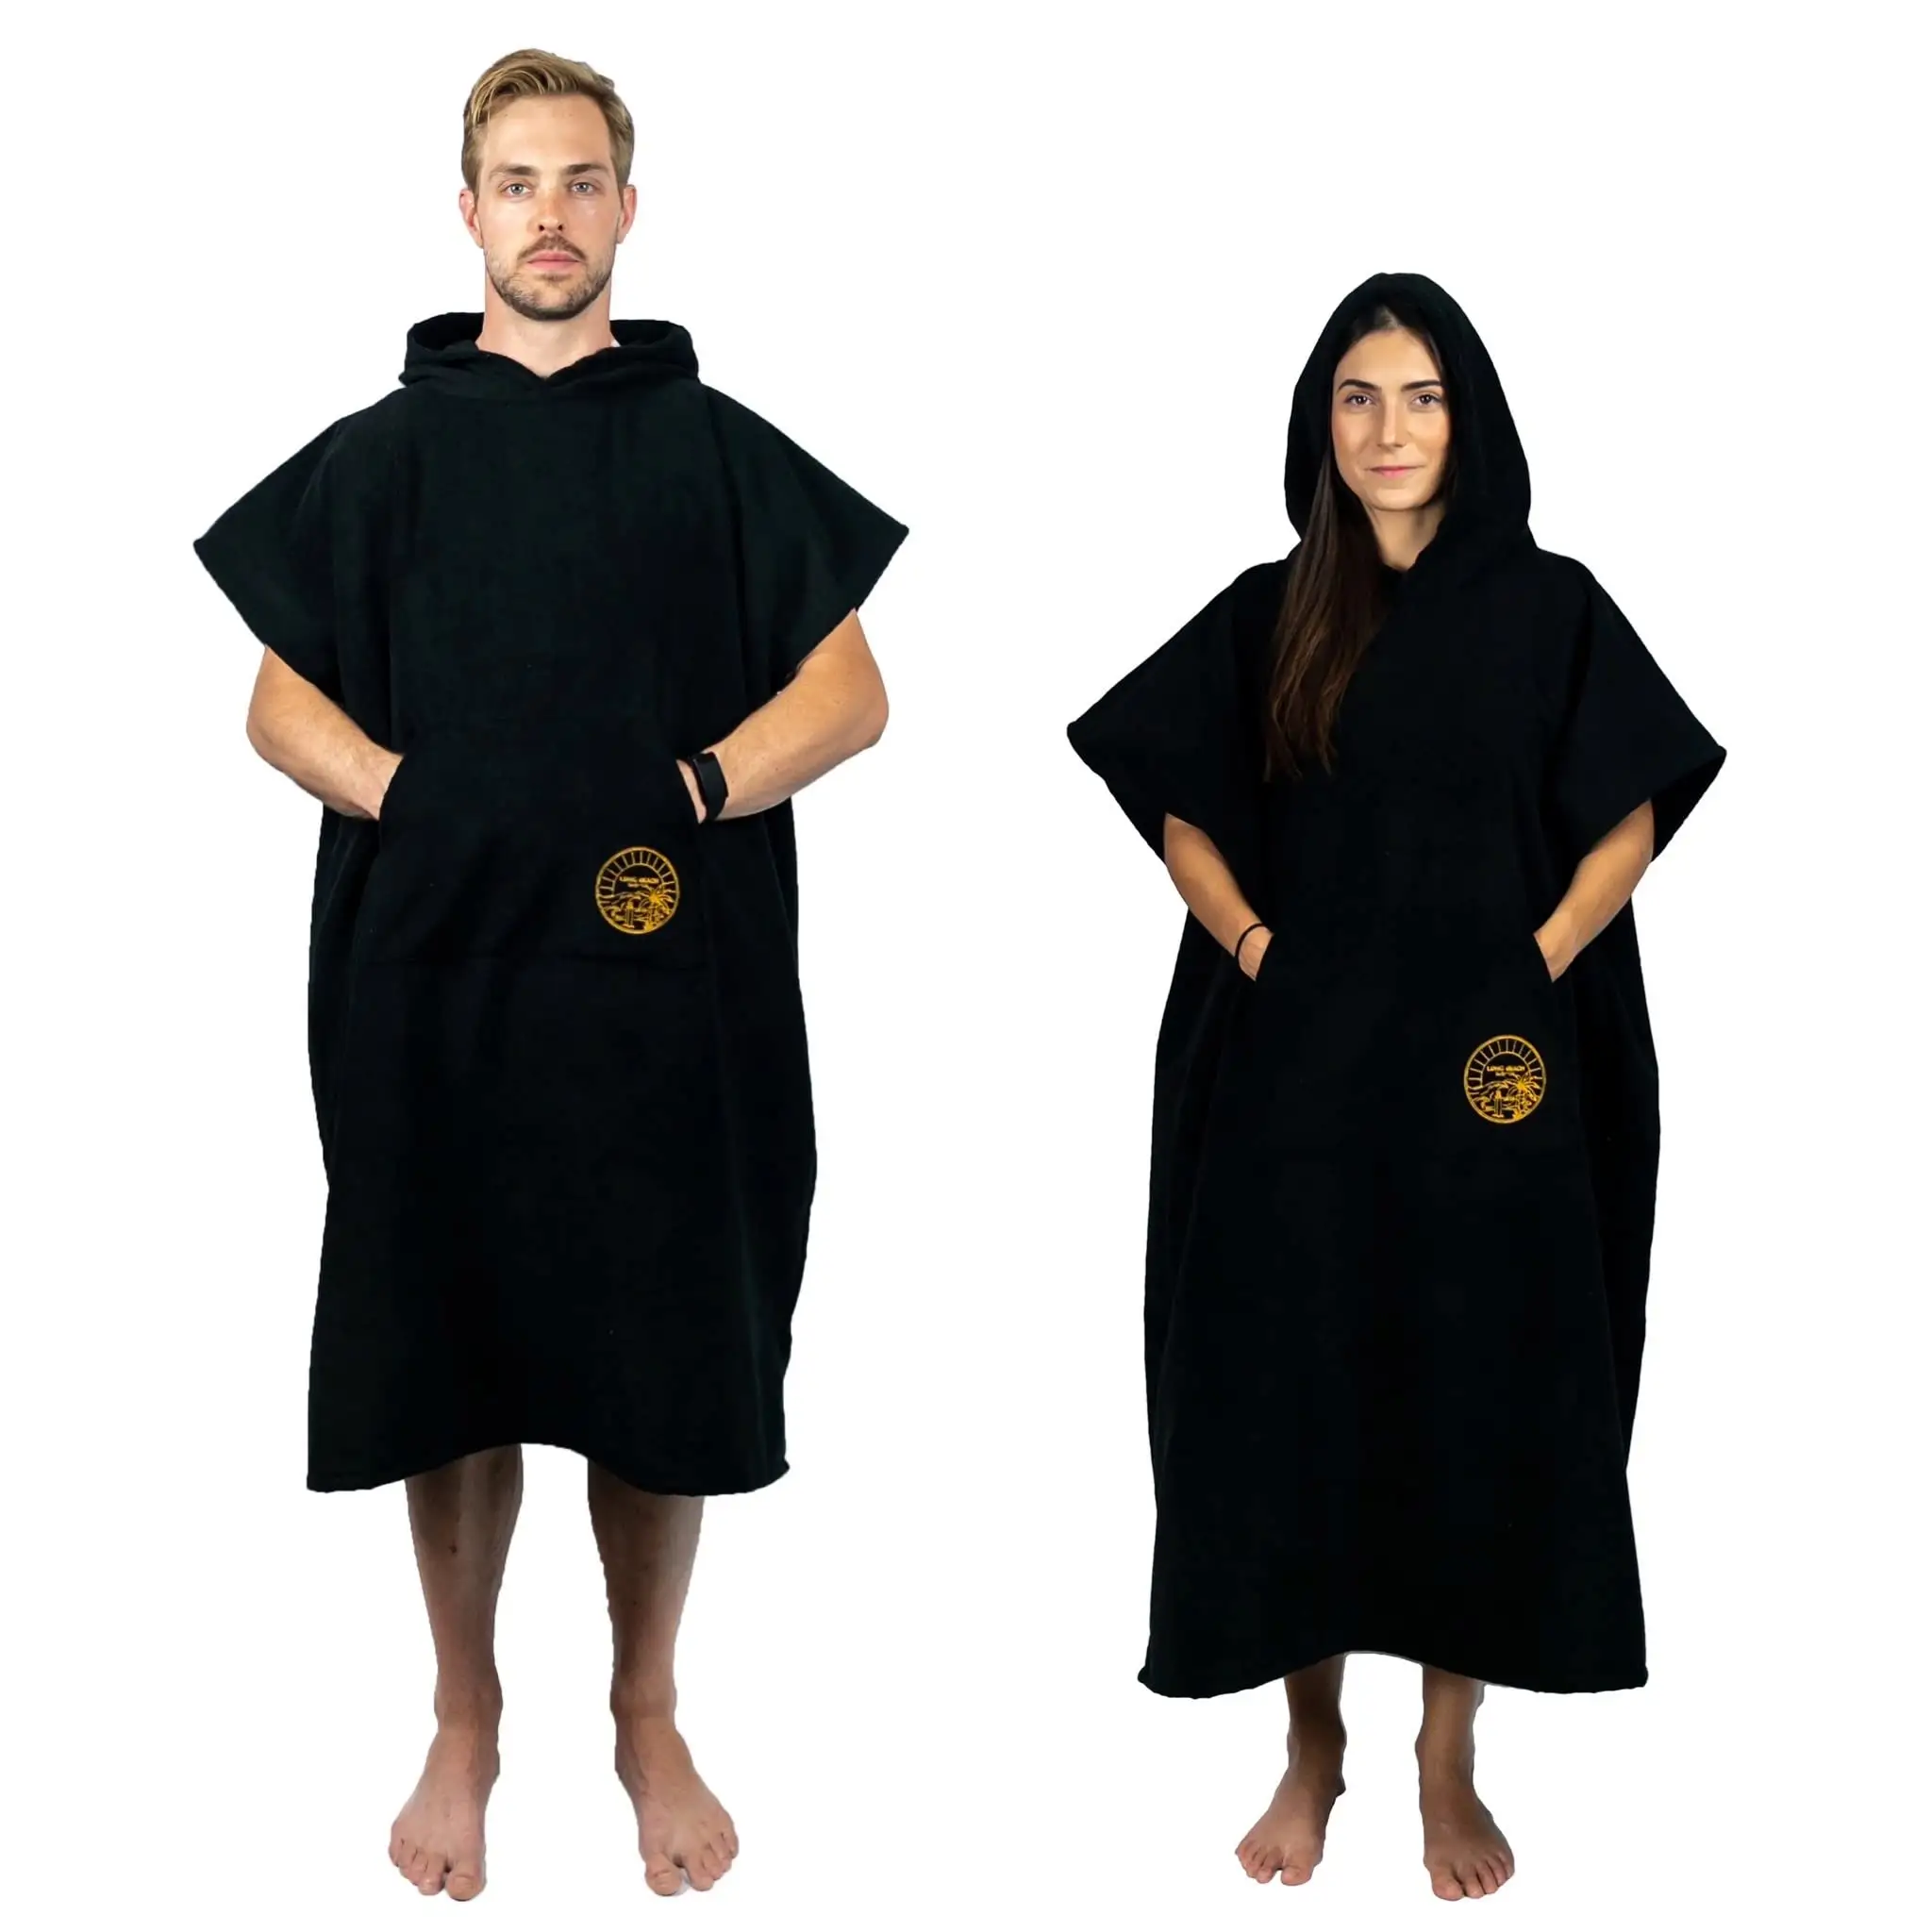 Poncho Towel Wholesale Customized Adults Hooded 100% Cotton Surf Poncho Hooded Beach Robe Towel surf changing robe